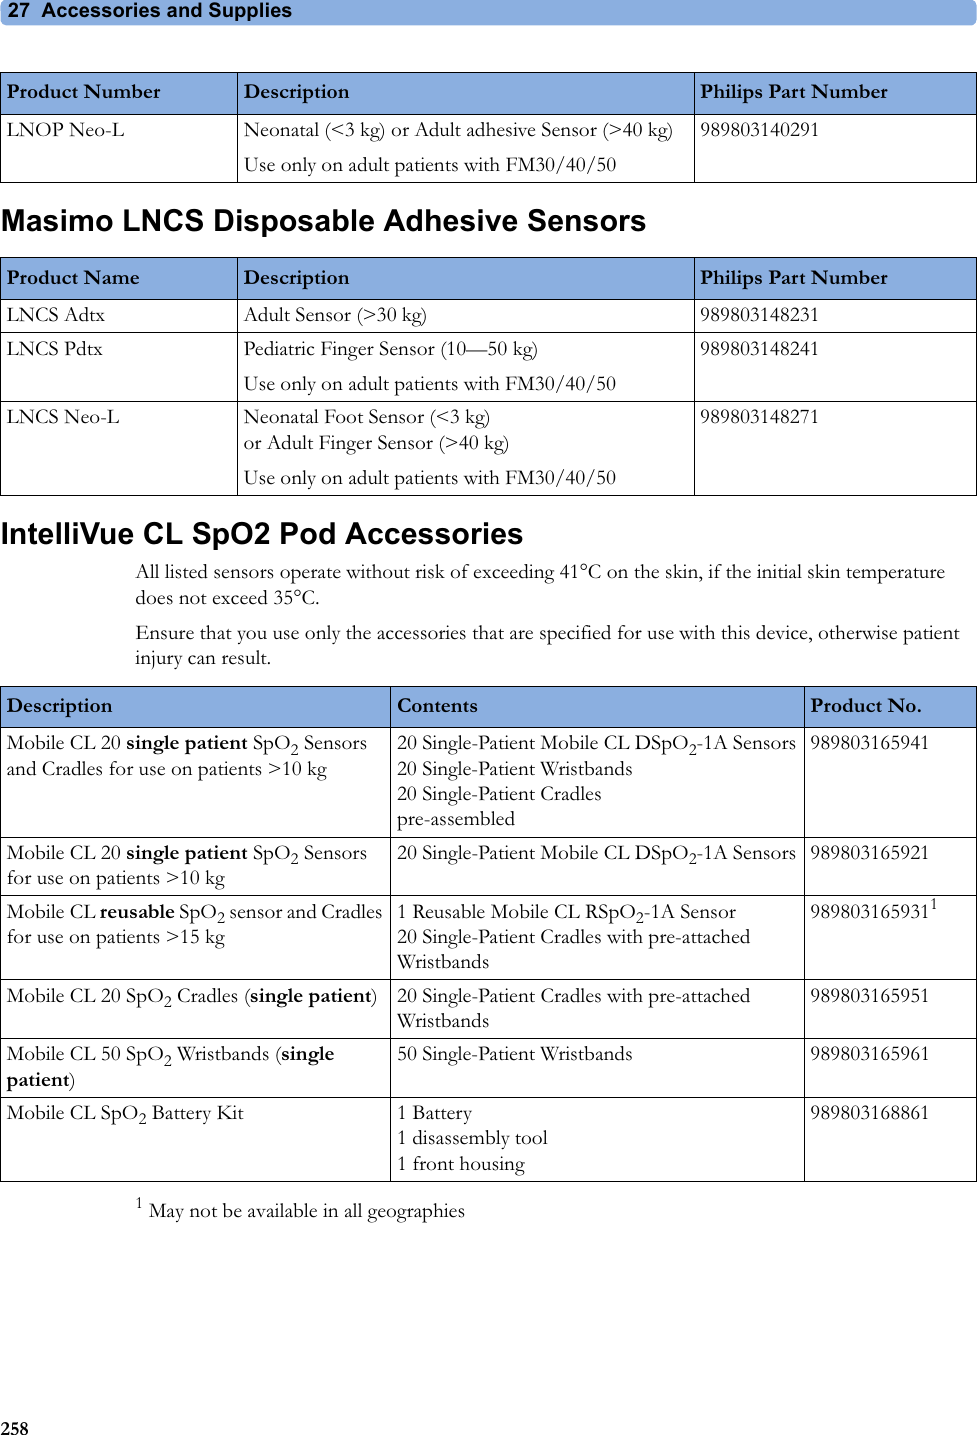 27  Accessories and Supplies258Masimo LNCS Disposable Adhesive SensorsIntelliVue CL SpO2 Pod AccessoriesAll listed sensors operate without risk of exceeding 41°C on the skin, if the initial skin temperature does not exceed 35°C.Ensure that you use only the accessories that are specified for use with this device, otherwise patient injury can result.1 May not be available in all geographiesLNOP Neo-L Neonatal (&lt;3 kg) or Adult adhesive Sensor (&gt;40 kg)Use only on adult patients with FM30/40/50989803140291Product Number Description Philips Part NumberProduct Name Description Philips Part NumberLNCS Adtx Adult Sensor (&gt;30 kg) 989803148231LNCS Pdtx Pediatric Finger Sensor (10—50 kg)Use only on adult patients with FM30/40/50989803148241LNCS Neo-L Neonatal Foot Sensor (&lt;3 kg) or Adult Finger Sensor (&gt;40 kg)Use only on adult patients with FM30/40/50989803148271Description Contents Product No.Mobile CL 20 single patient SpO2 Sensors and Cradles for use on patients &gt;10 kg20 Single-Patient Mobile CL DSpO2-1A Sensors 20 Single-Patient Wristbands 20 Single-Patient Cradles pre-assembled989803165941Mobile CL 20 single patient SpO2 Sensors for use on patients &gt;10 kg20 Single-Patient Mobile CL DSpO2-1A Sensors 989803165921Mobile CL reusable SpO2 sensor and Cradles for use on patients &gt;15 kg1 Reusable Mobile CL RSpO2-1A Sensor 20 Single-Patient Cradles with pre-attached Wristbands9898031659311Mobile CL 20 SpO2 Cradles (single patient) 20 Single-Patient Cradles with pre-attached Wristbands989803165951Mobile CL 50 SpO2 Wristbands (single patient)50 Single-Patient Wristbands 989803165961Mobile CL SpO2 Battery Kit 1 Battery 1 disassembly tool 1 front housing989803168861